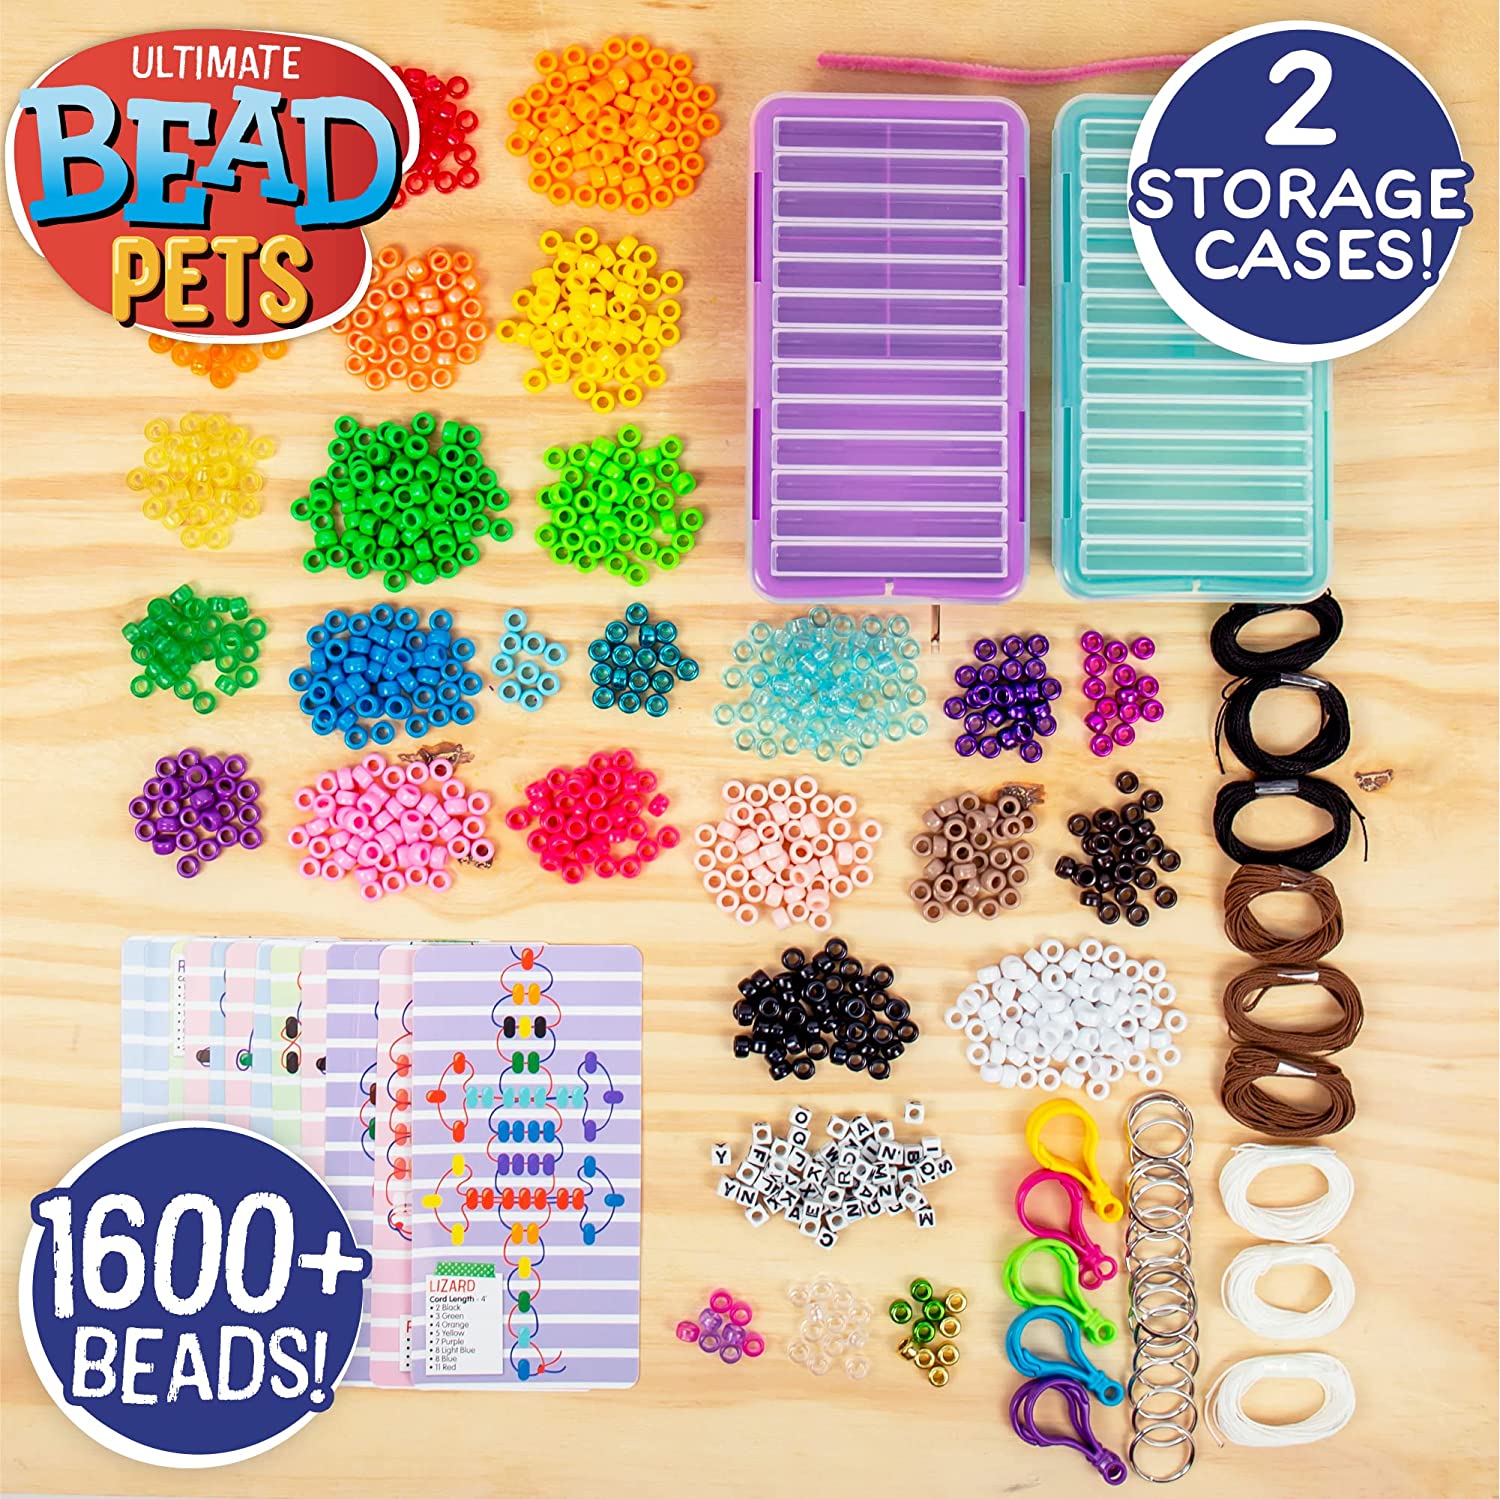 Made By Me Ultimate Bead Pets, Includes Over 1600 Beads, Carabiner